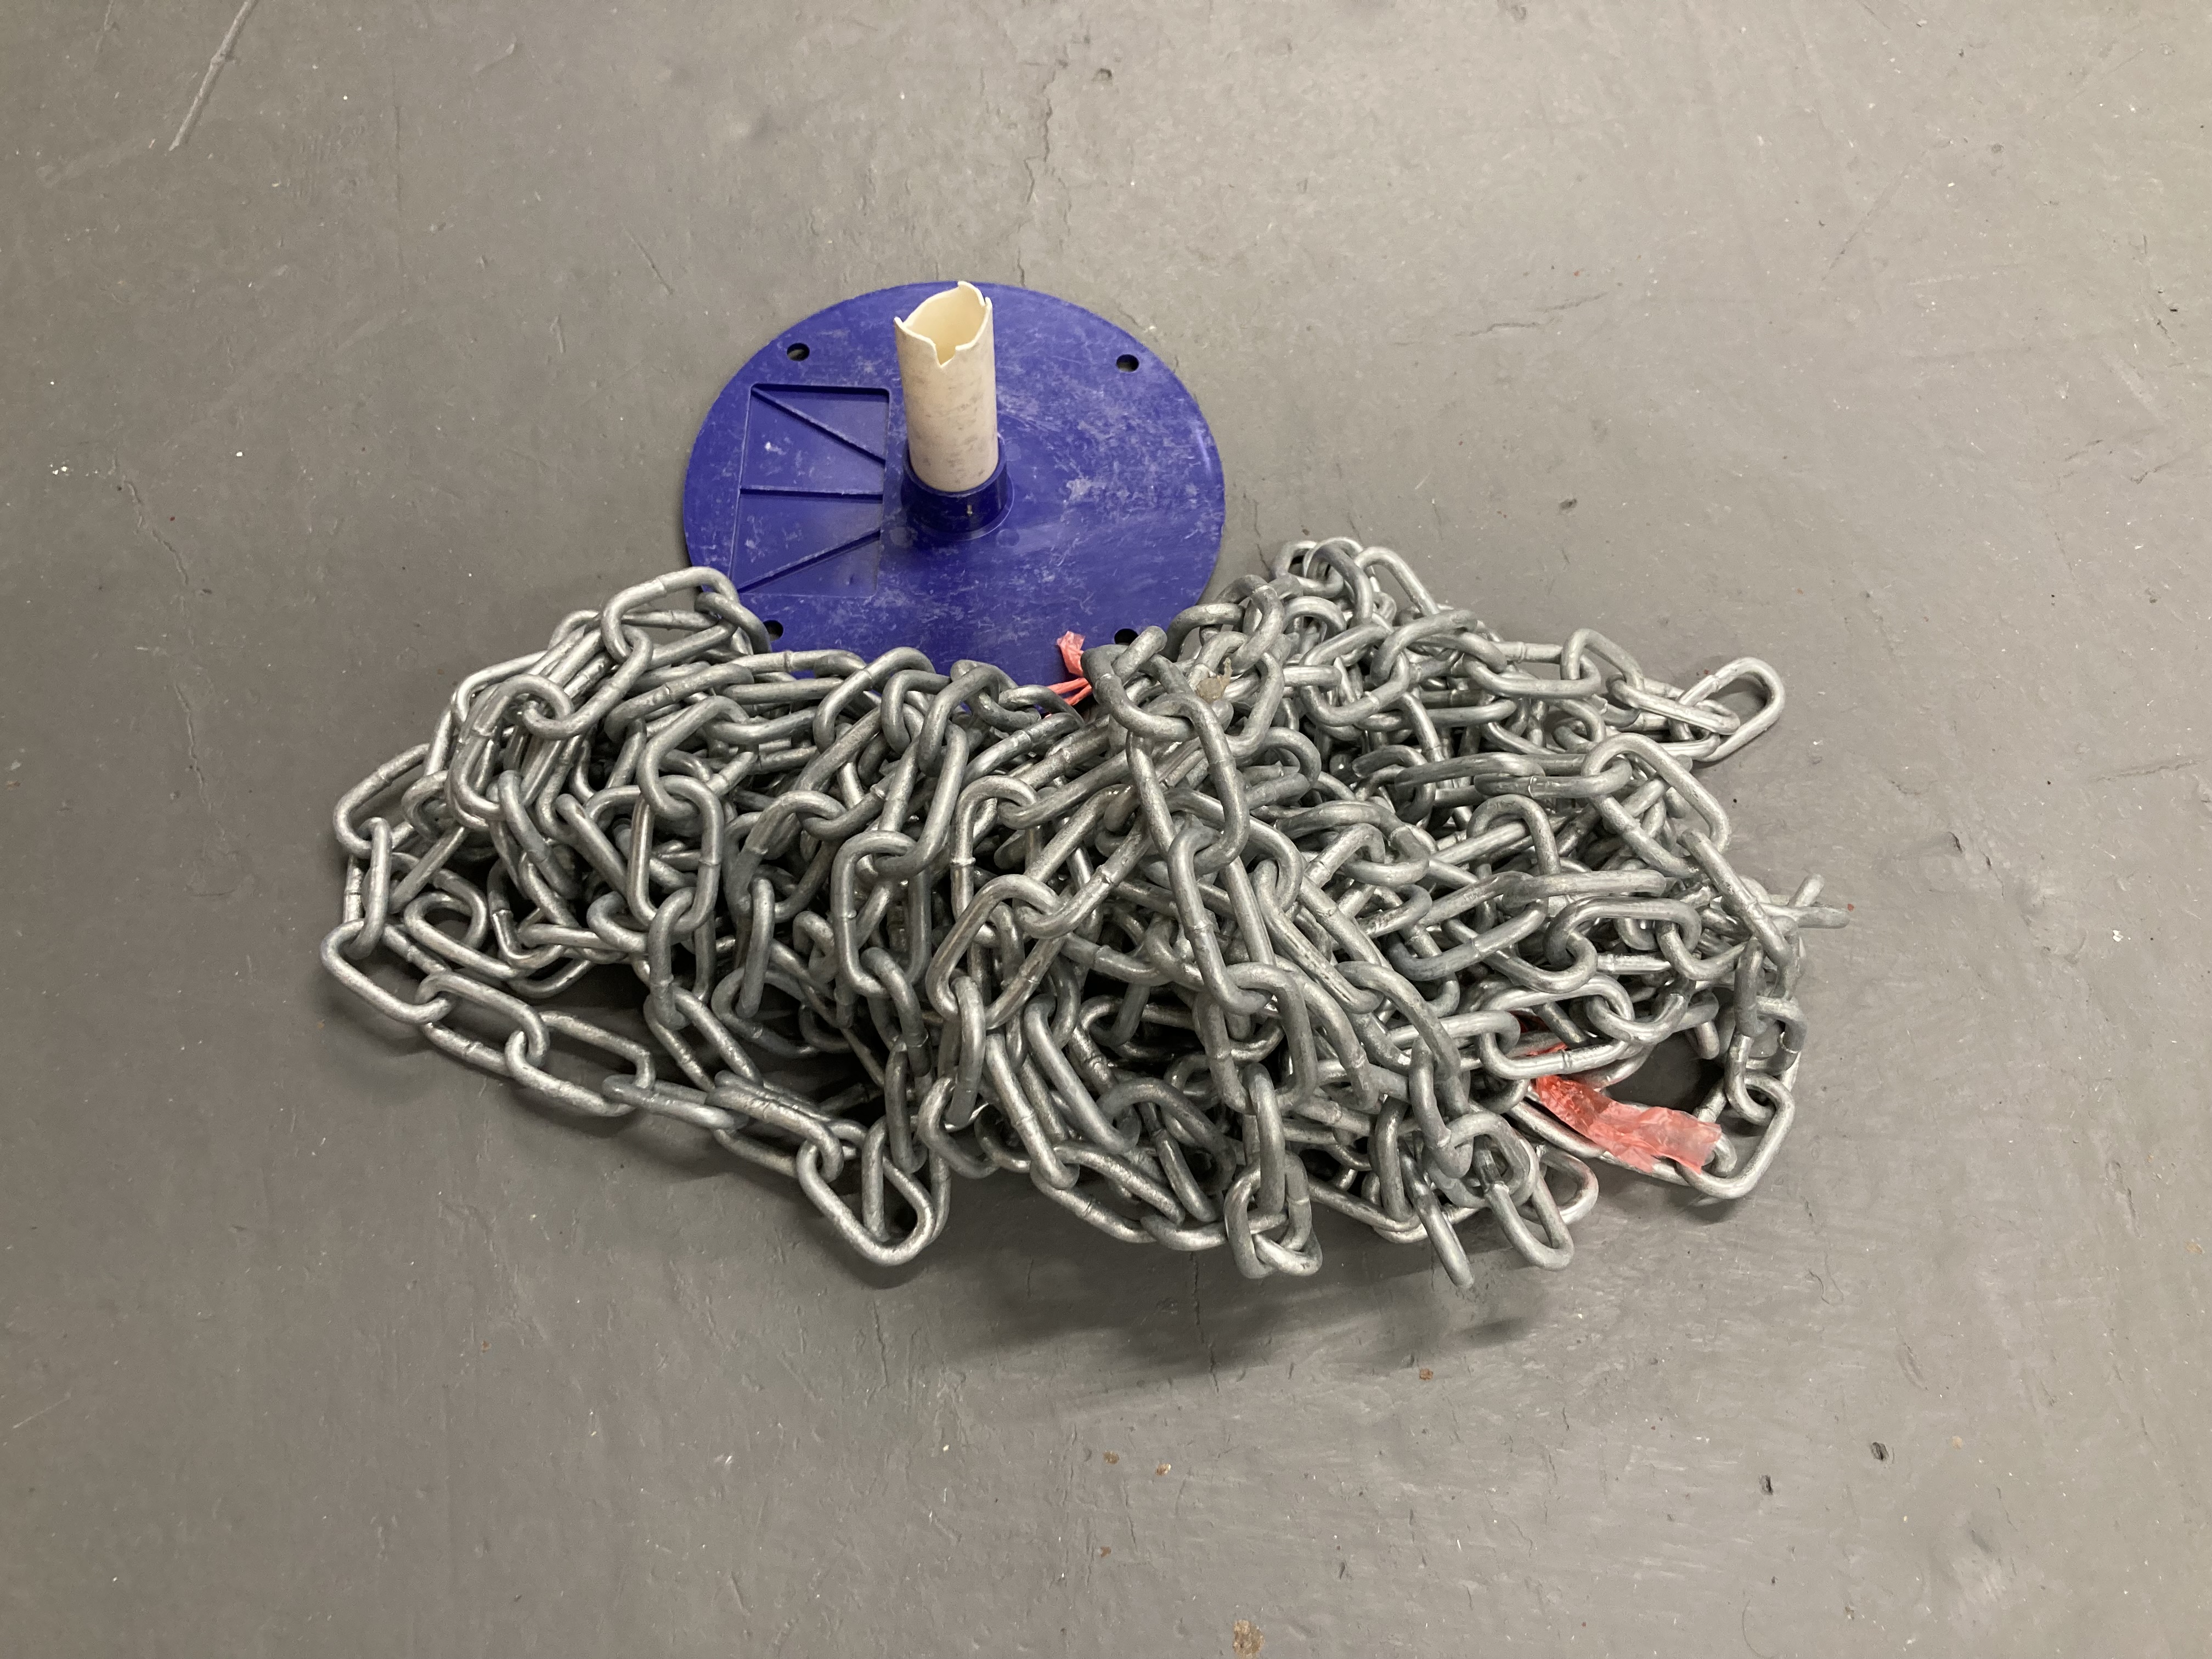 Approximately 15 meters of galvanized chain